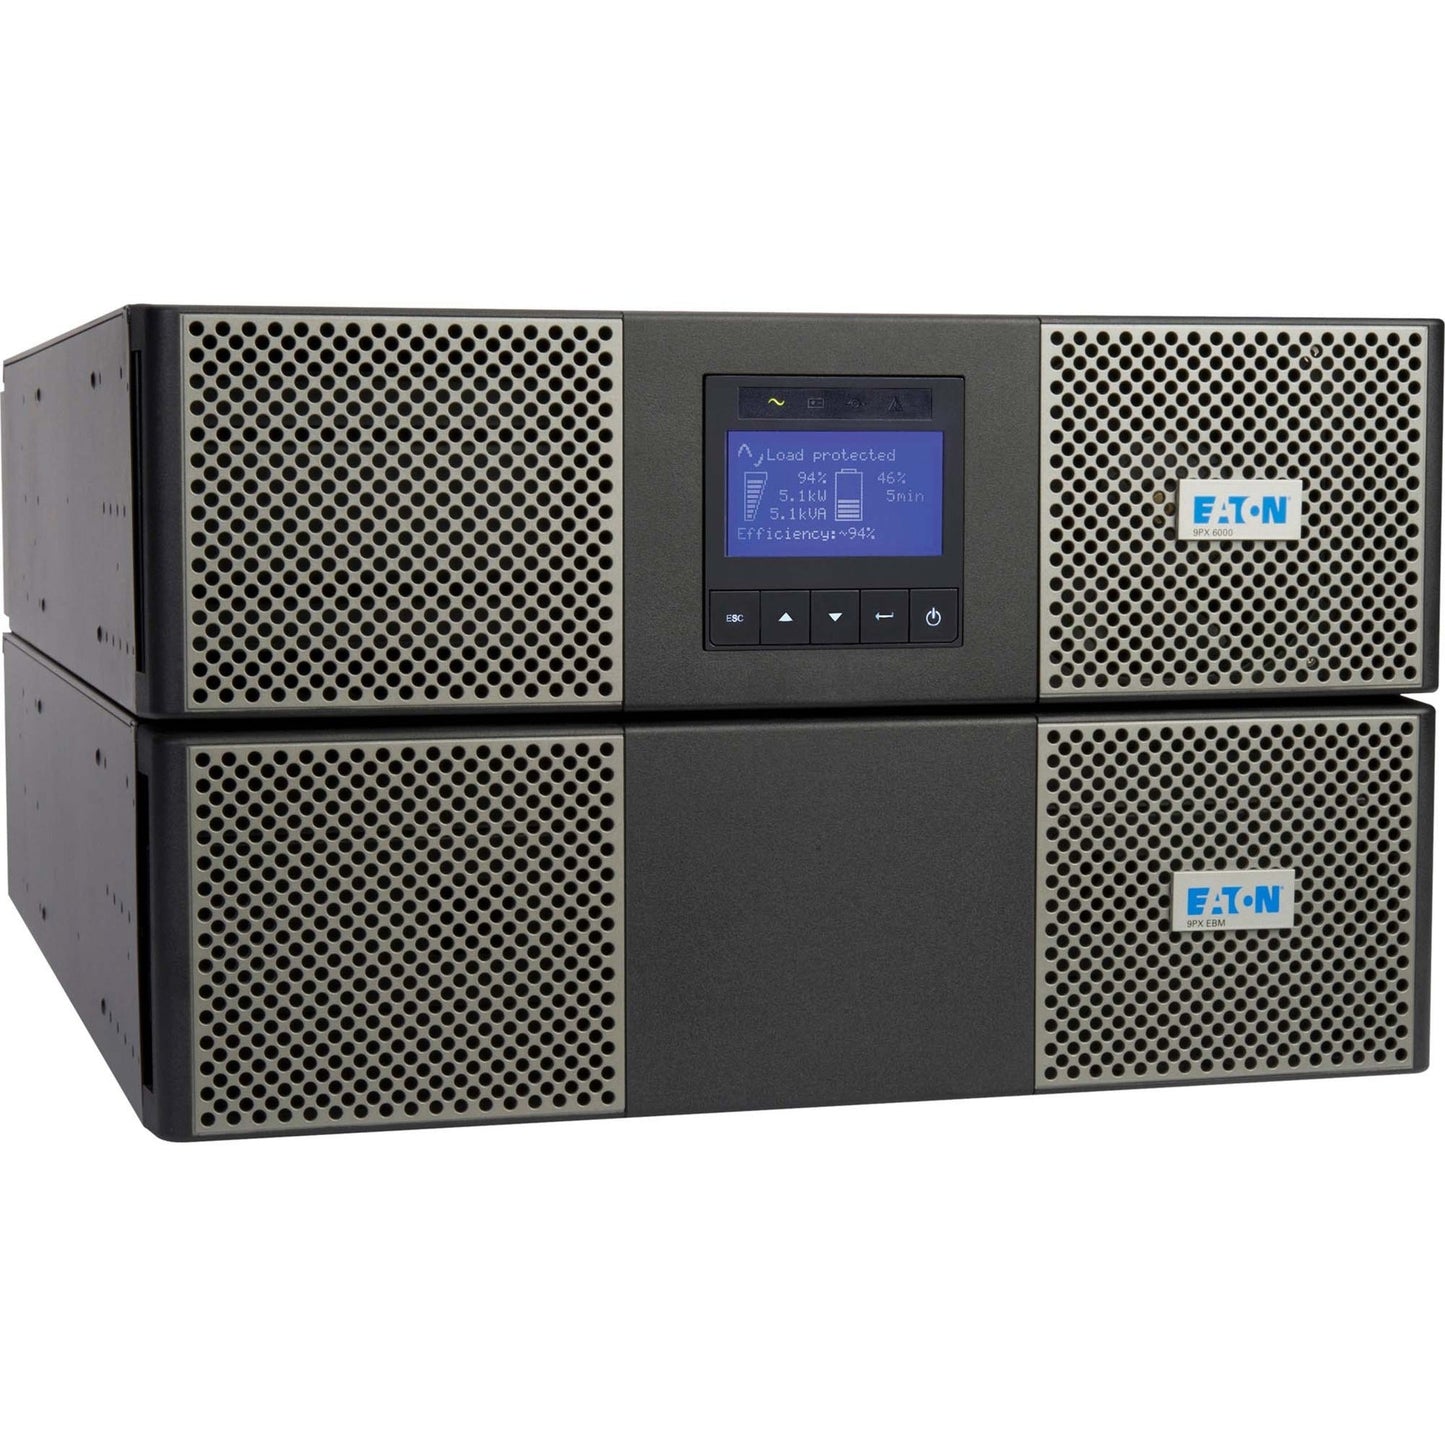 Eaton 9PX 3000VA 3000W 208V Online Double-Conversion UPS - L6-30P 18x 5-20R 2 L6-20R 1 L6-30R Outlets Cybersecure Network Card Extended Run 6U Rack/Tower